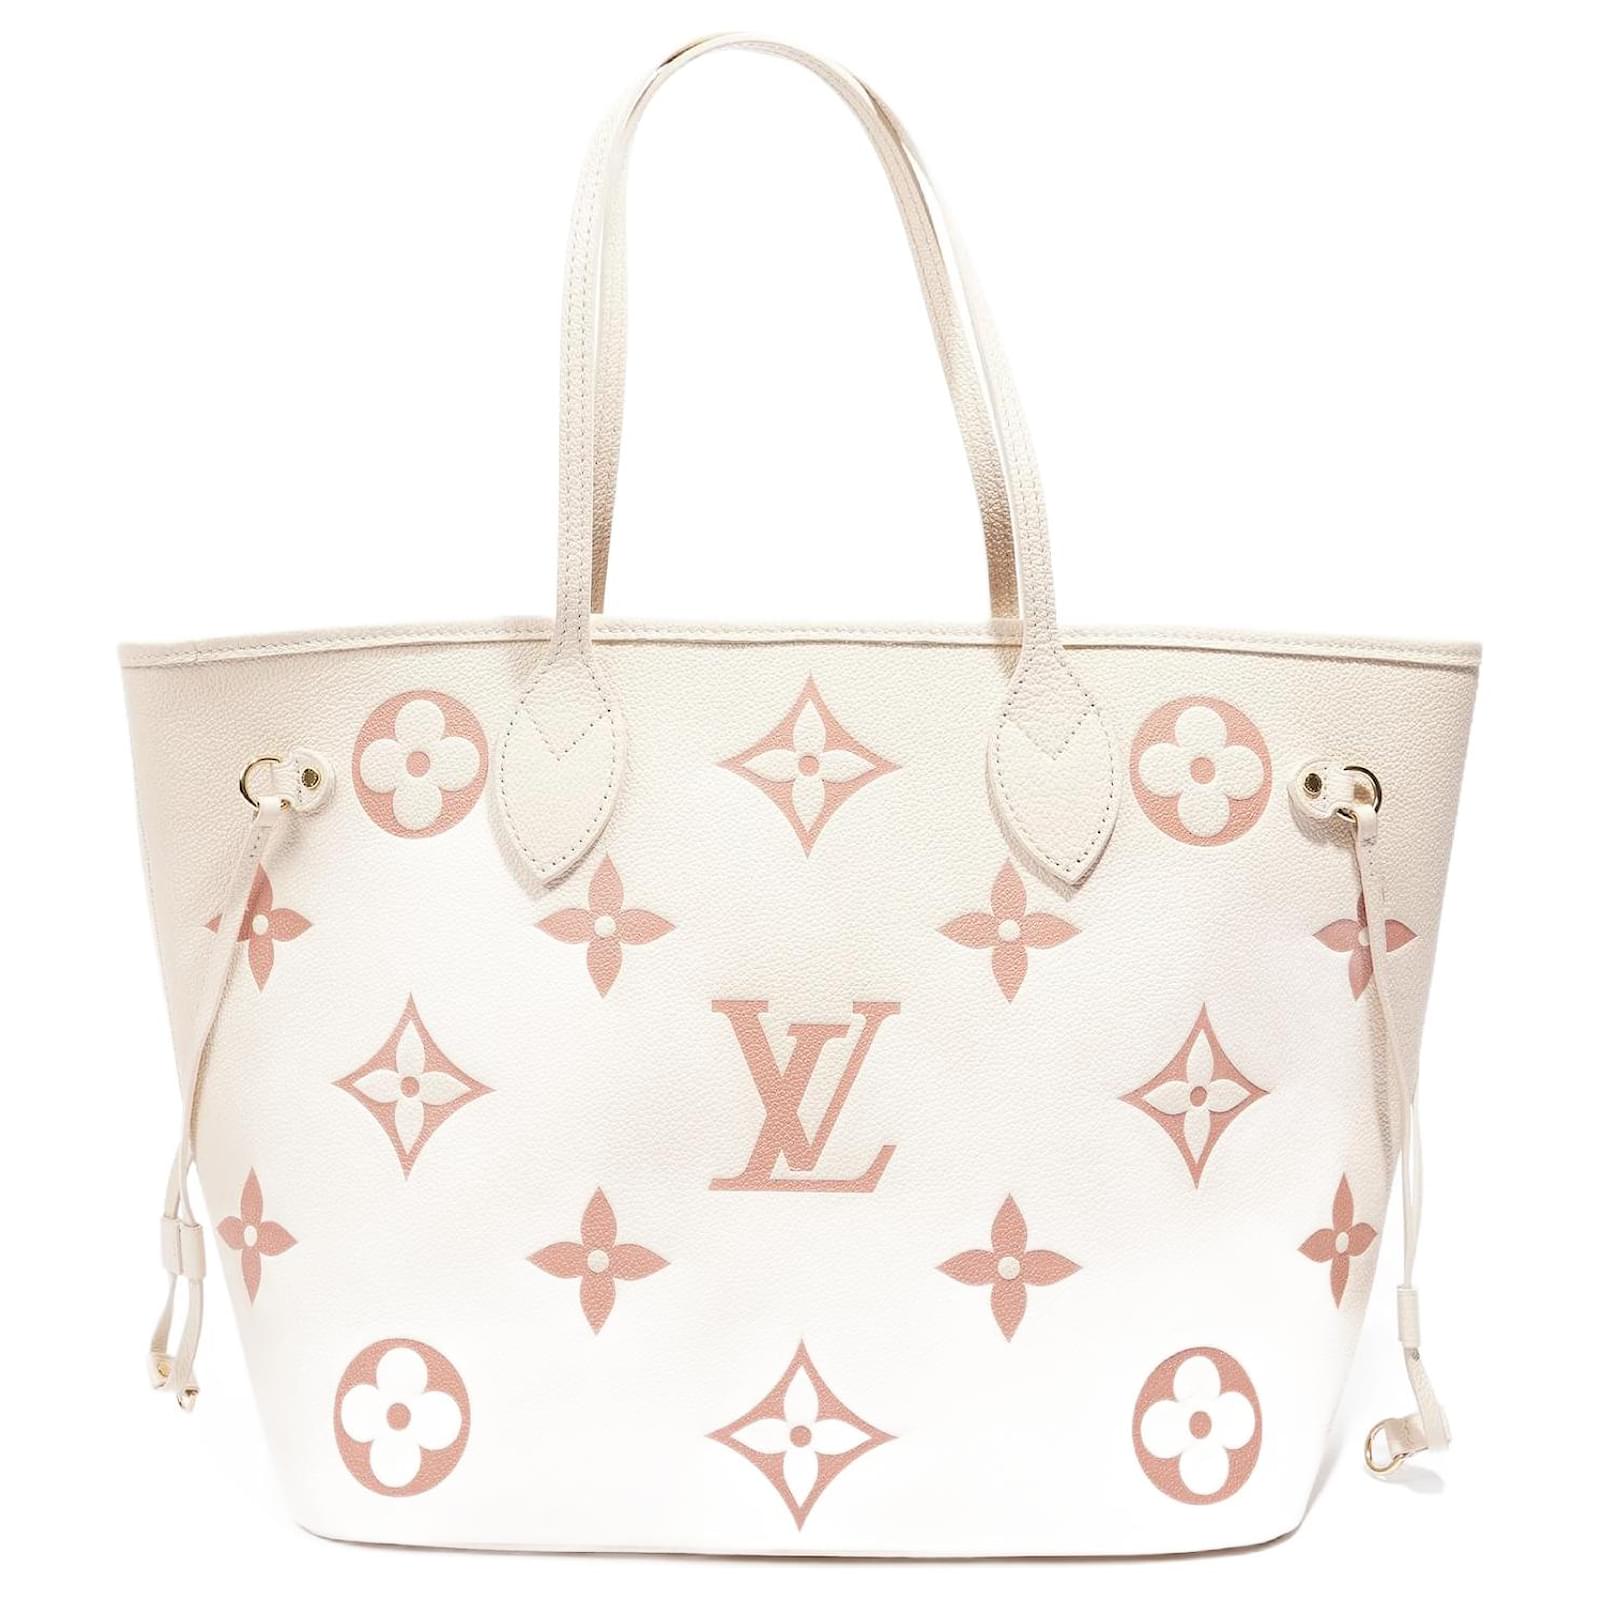 LOUIS VUITTON Women's Neverfull Leather in Cream